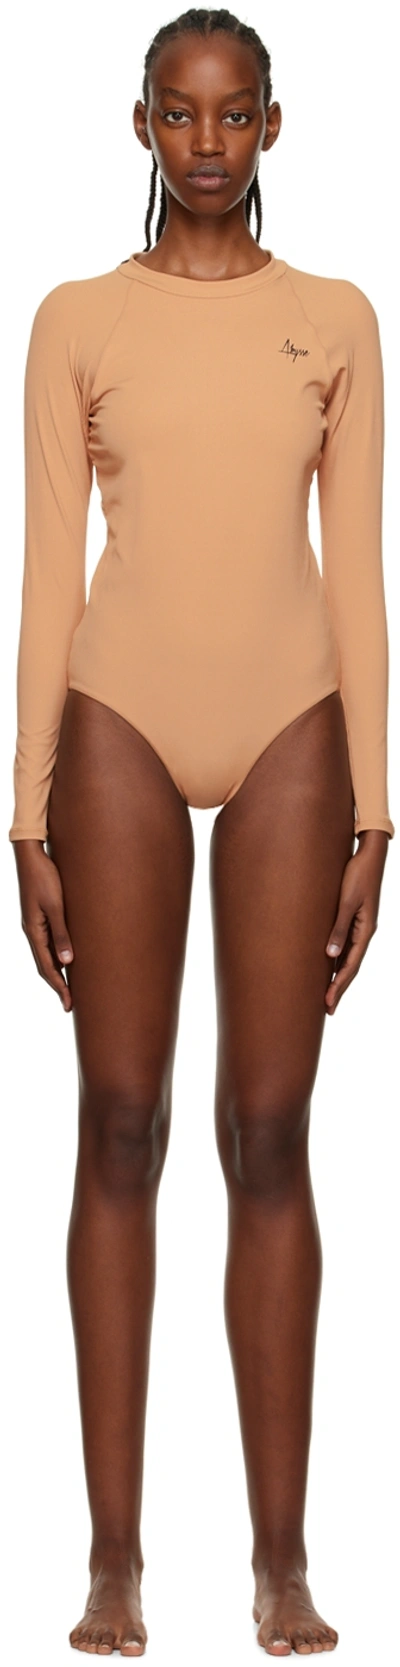 Abysse Tan Ama One-piece Swimsuit In Clay